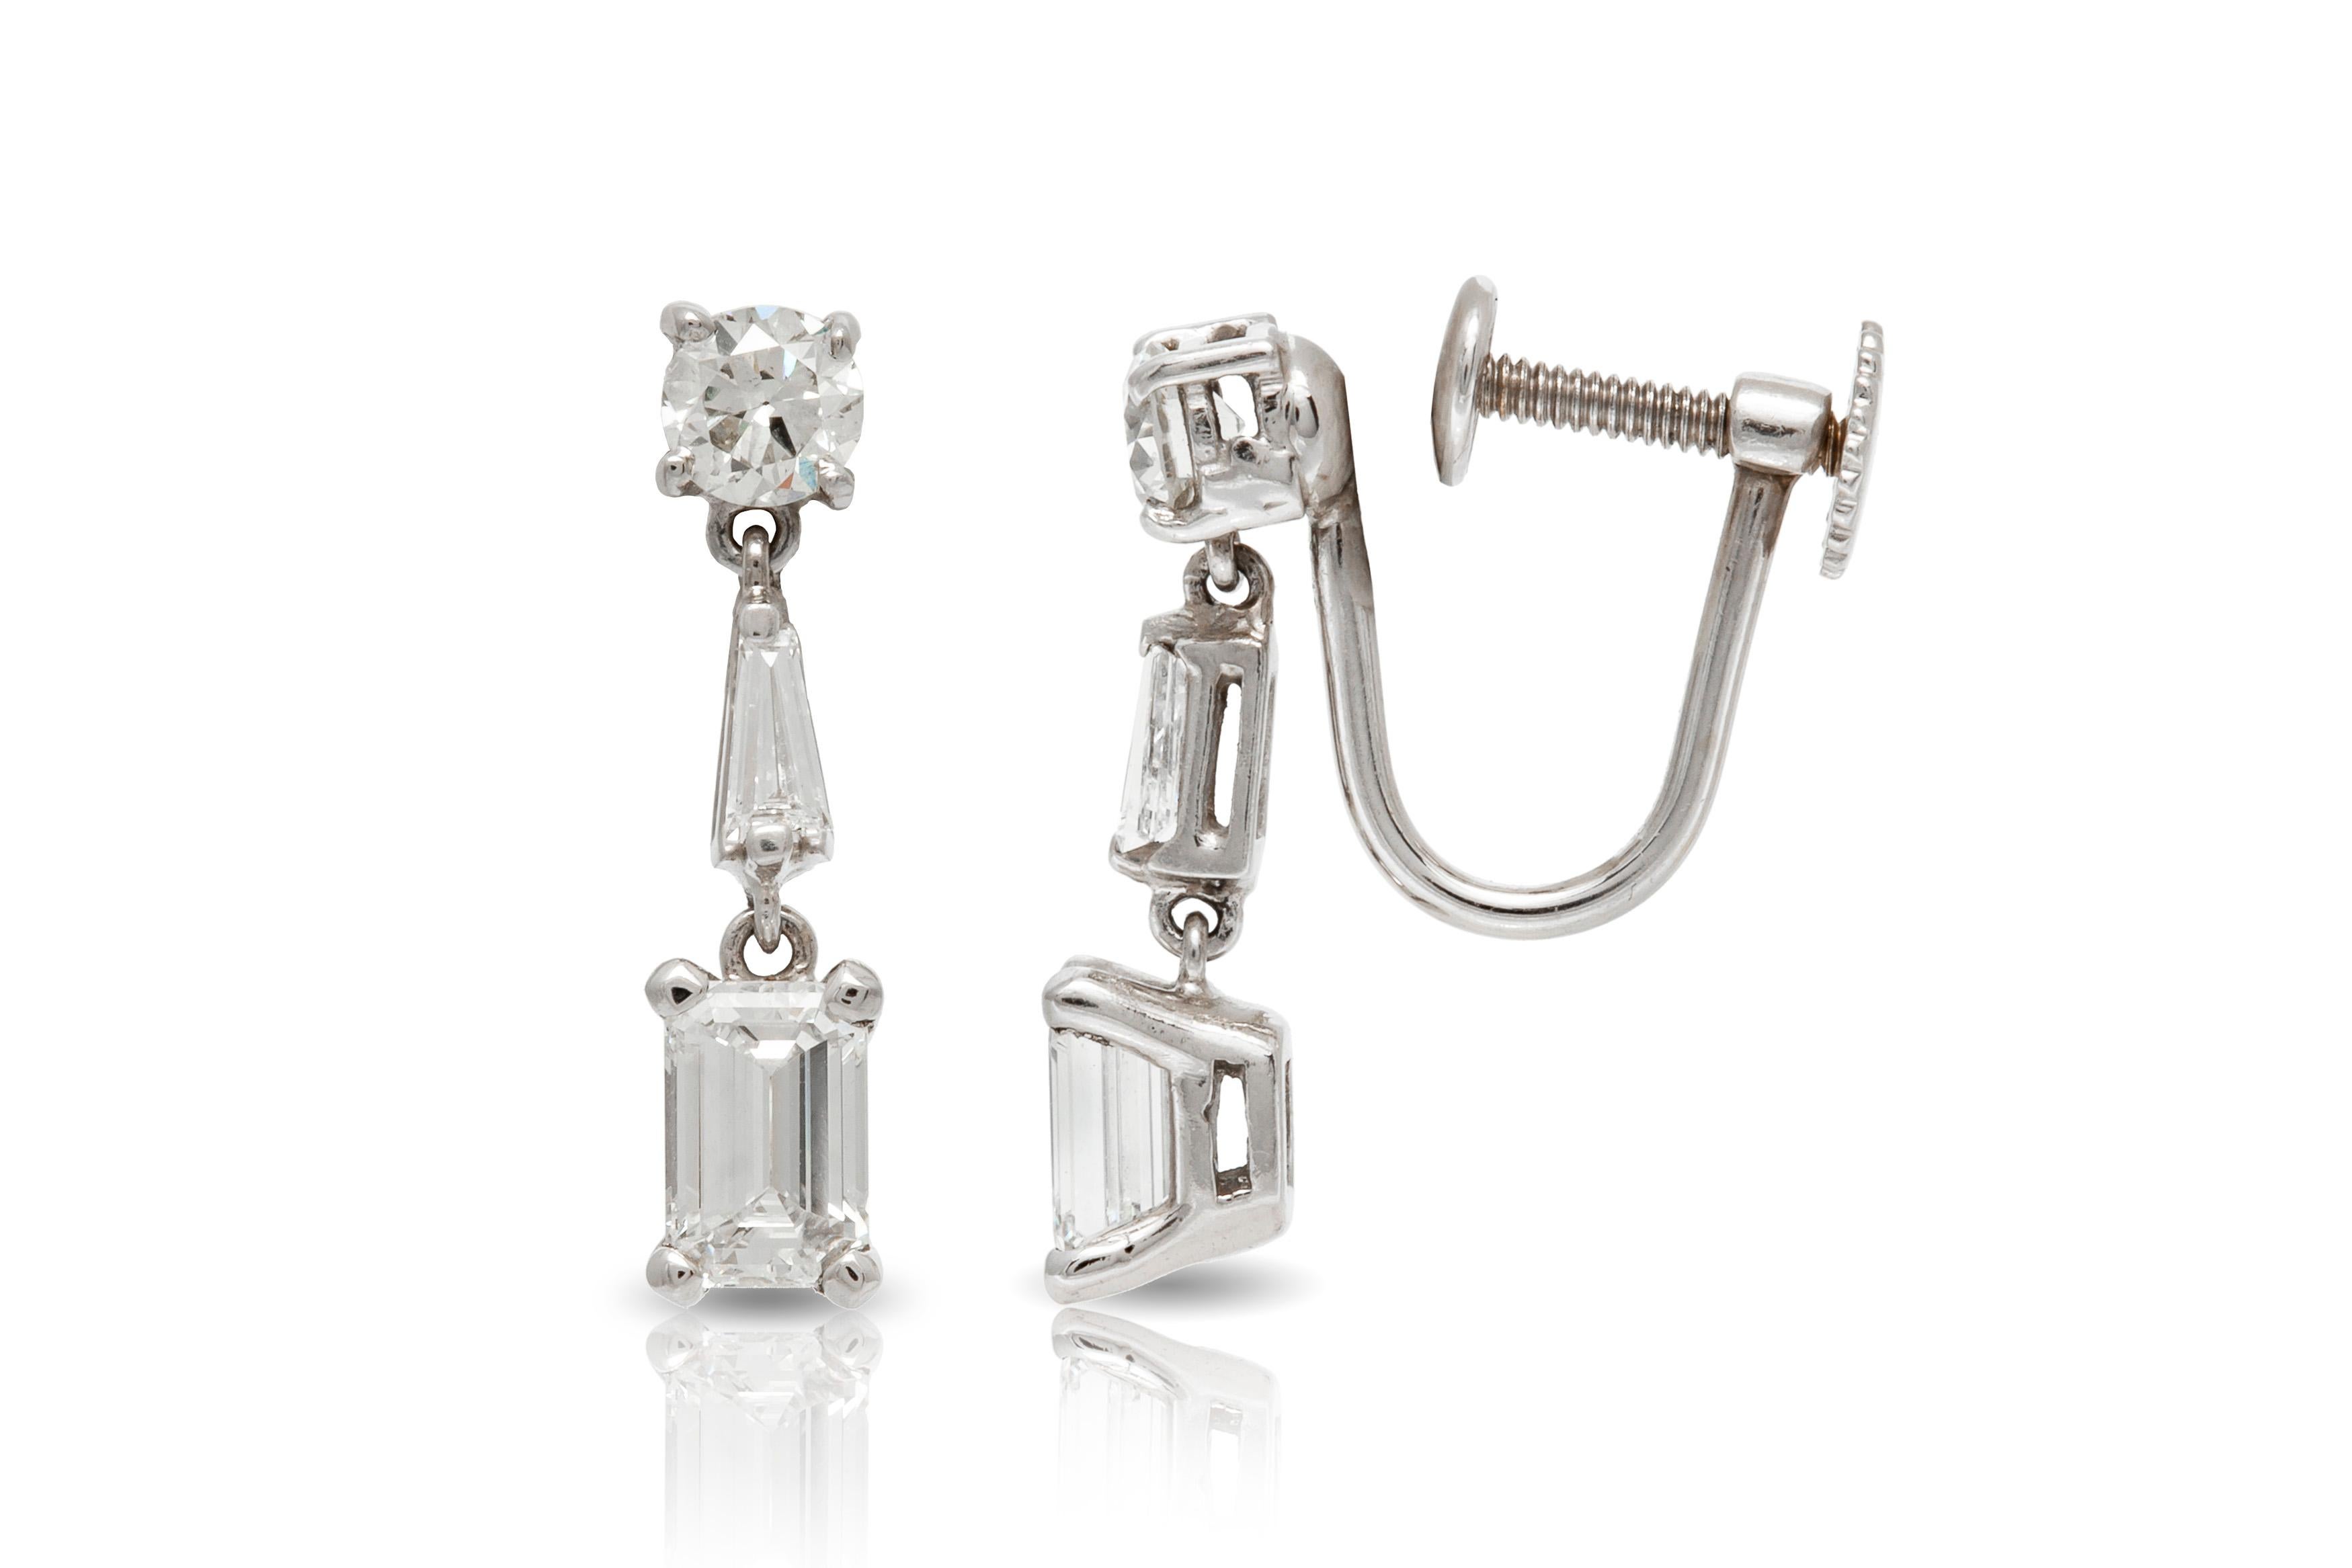 Earrings, finely crafted in platinum with emerald cut diamonds weighing approximately a total of 1.50 carat, round cut diamonds weighing approximately a total of 0.60 carat and baguette cut diamonds weighing approximately a total of 0.20 carat.